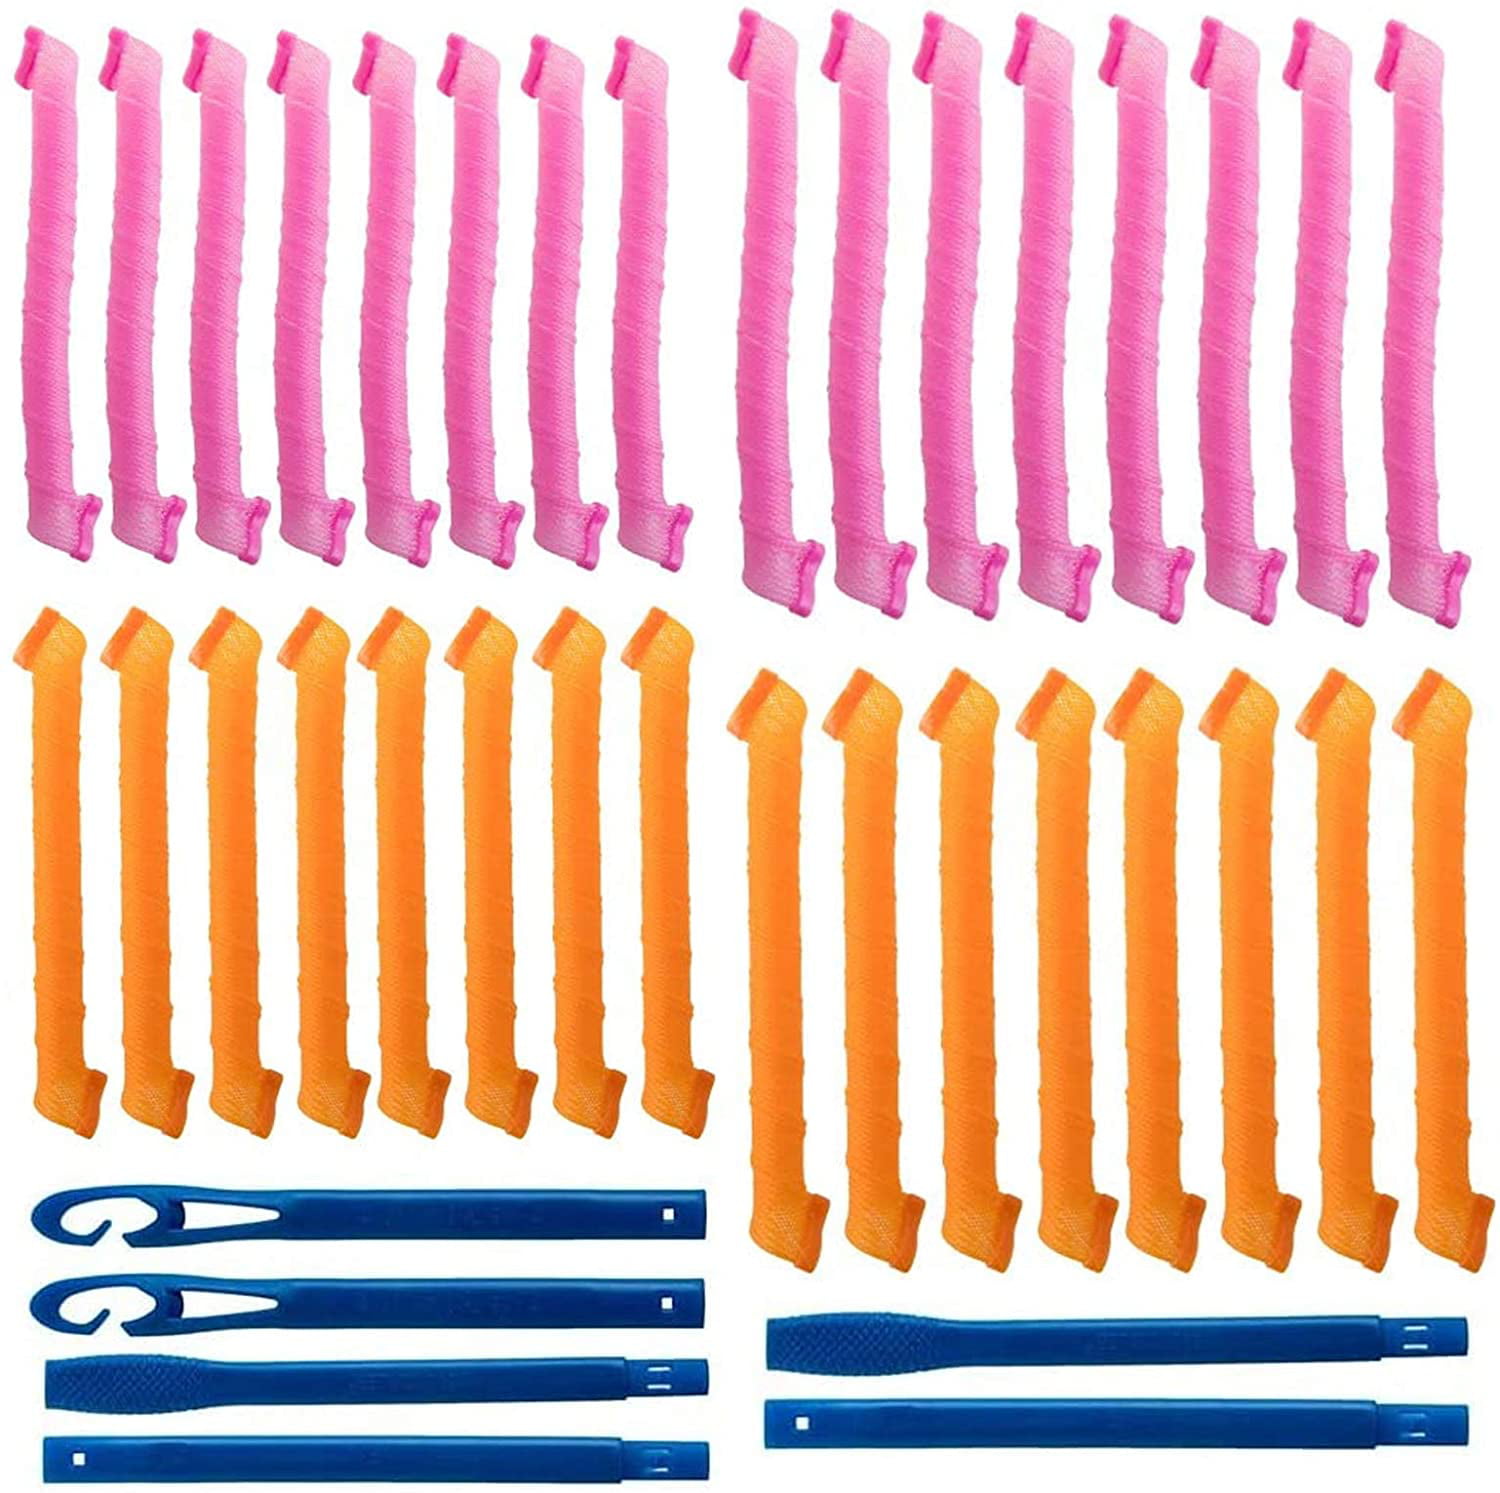 28 Pieces Hair Curlers Spiral Curls No Heat Wave Hair Curlers Styling Kit Spiral  Hair Curlers With 2 Pieces Styling Hooks For Most Kinds Of Ha  Fruugo ZA